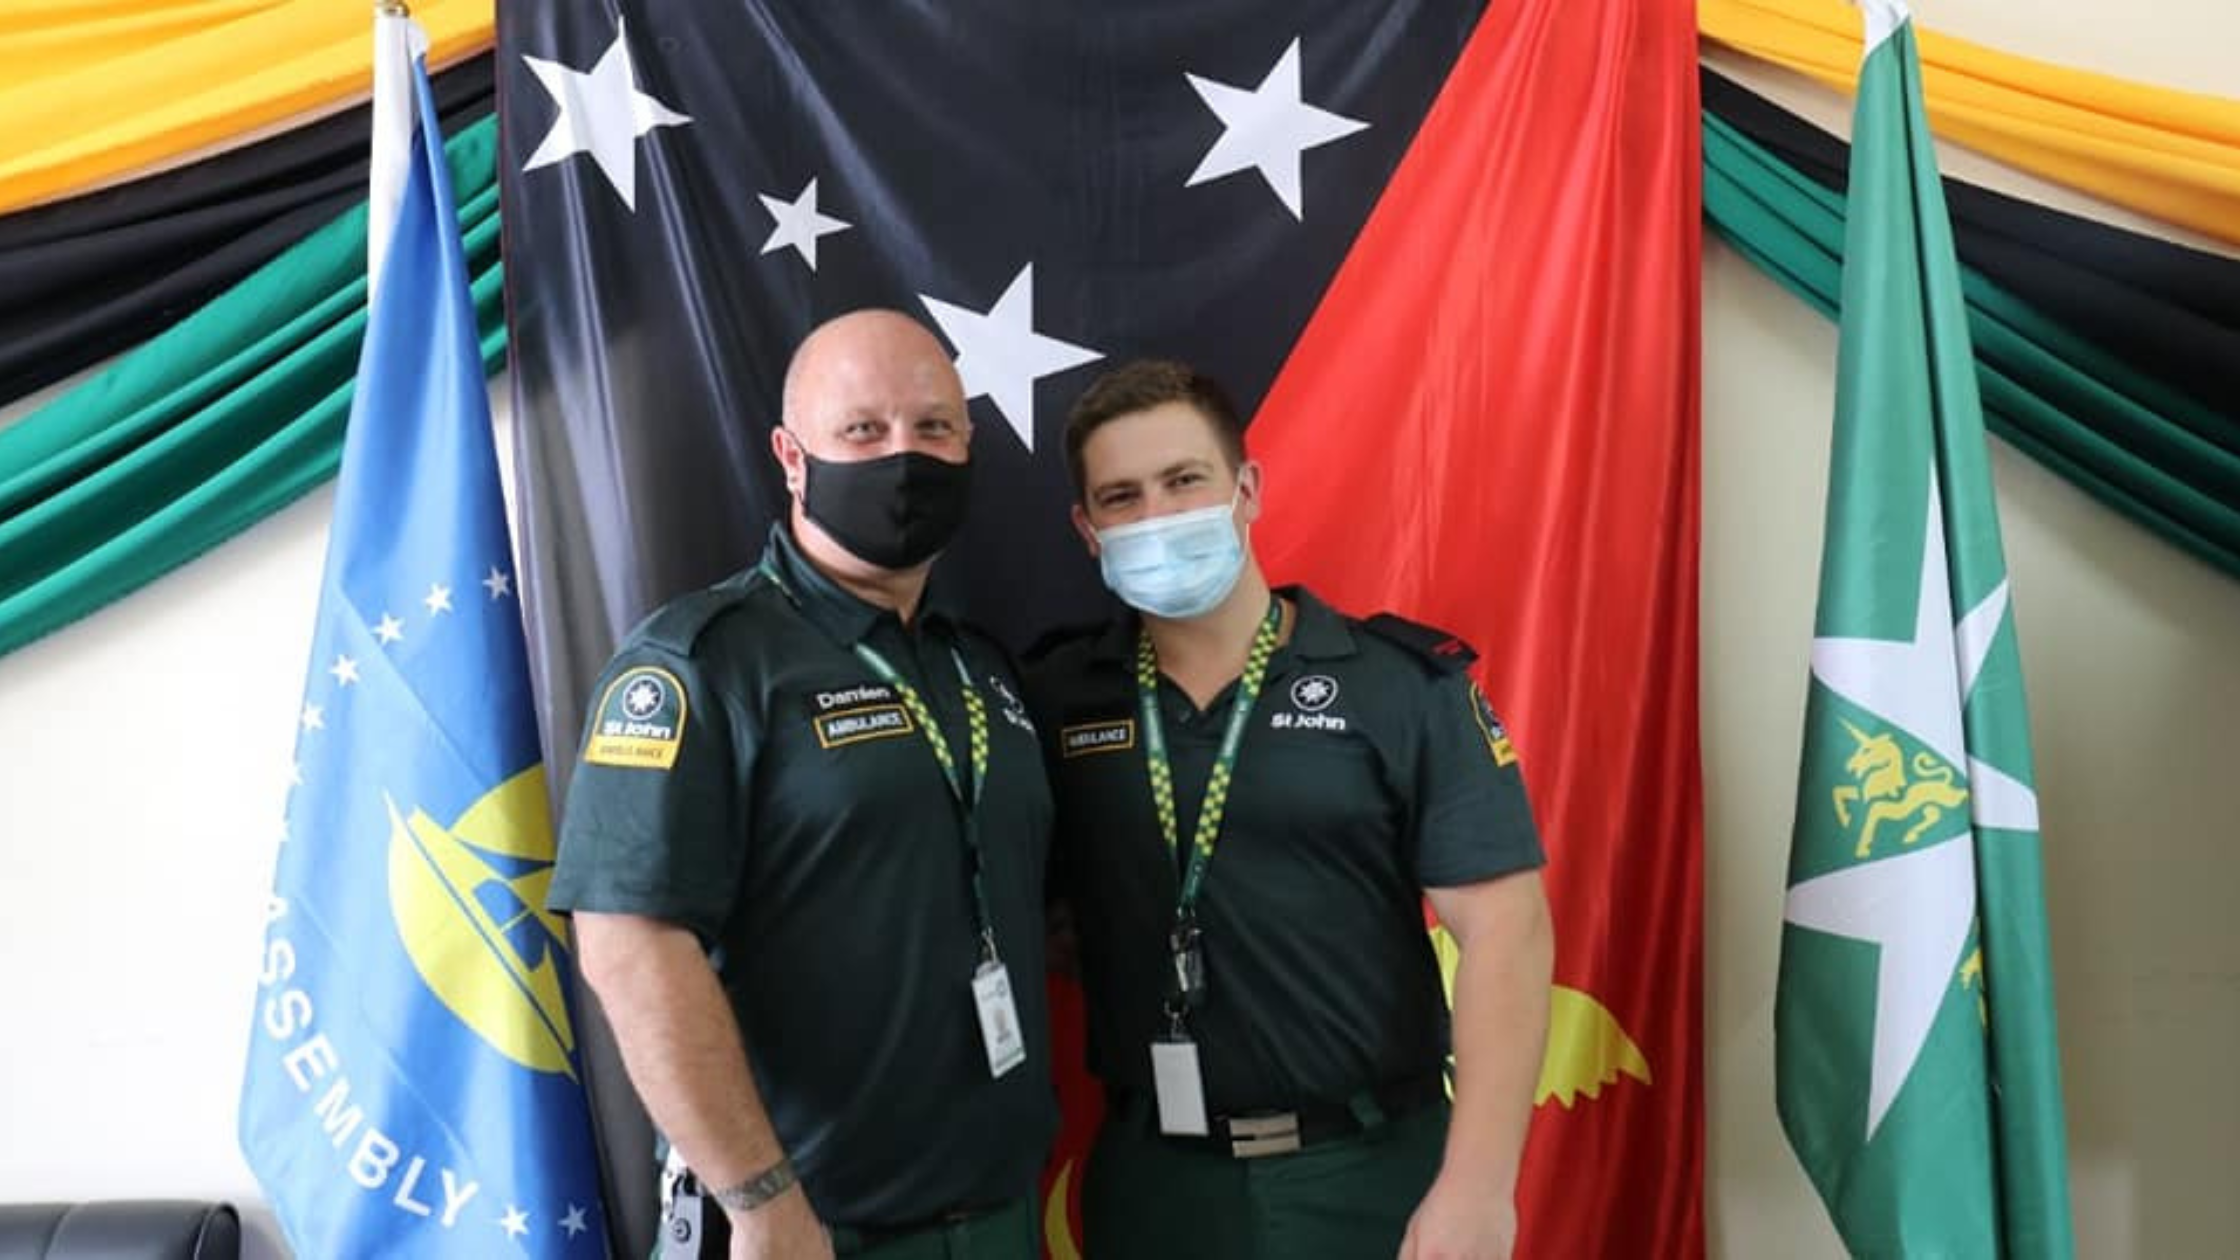 The St John Ambulance NSW Faces in Papua New Guinea: Meet Corey and Damien